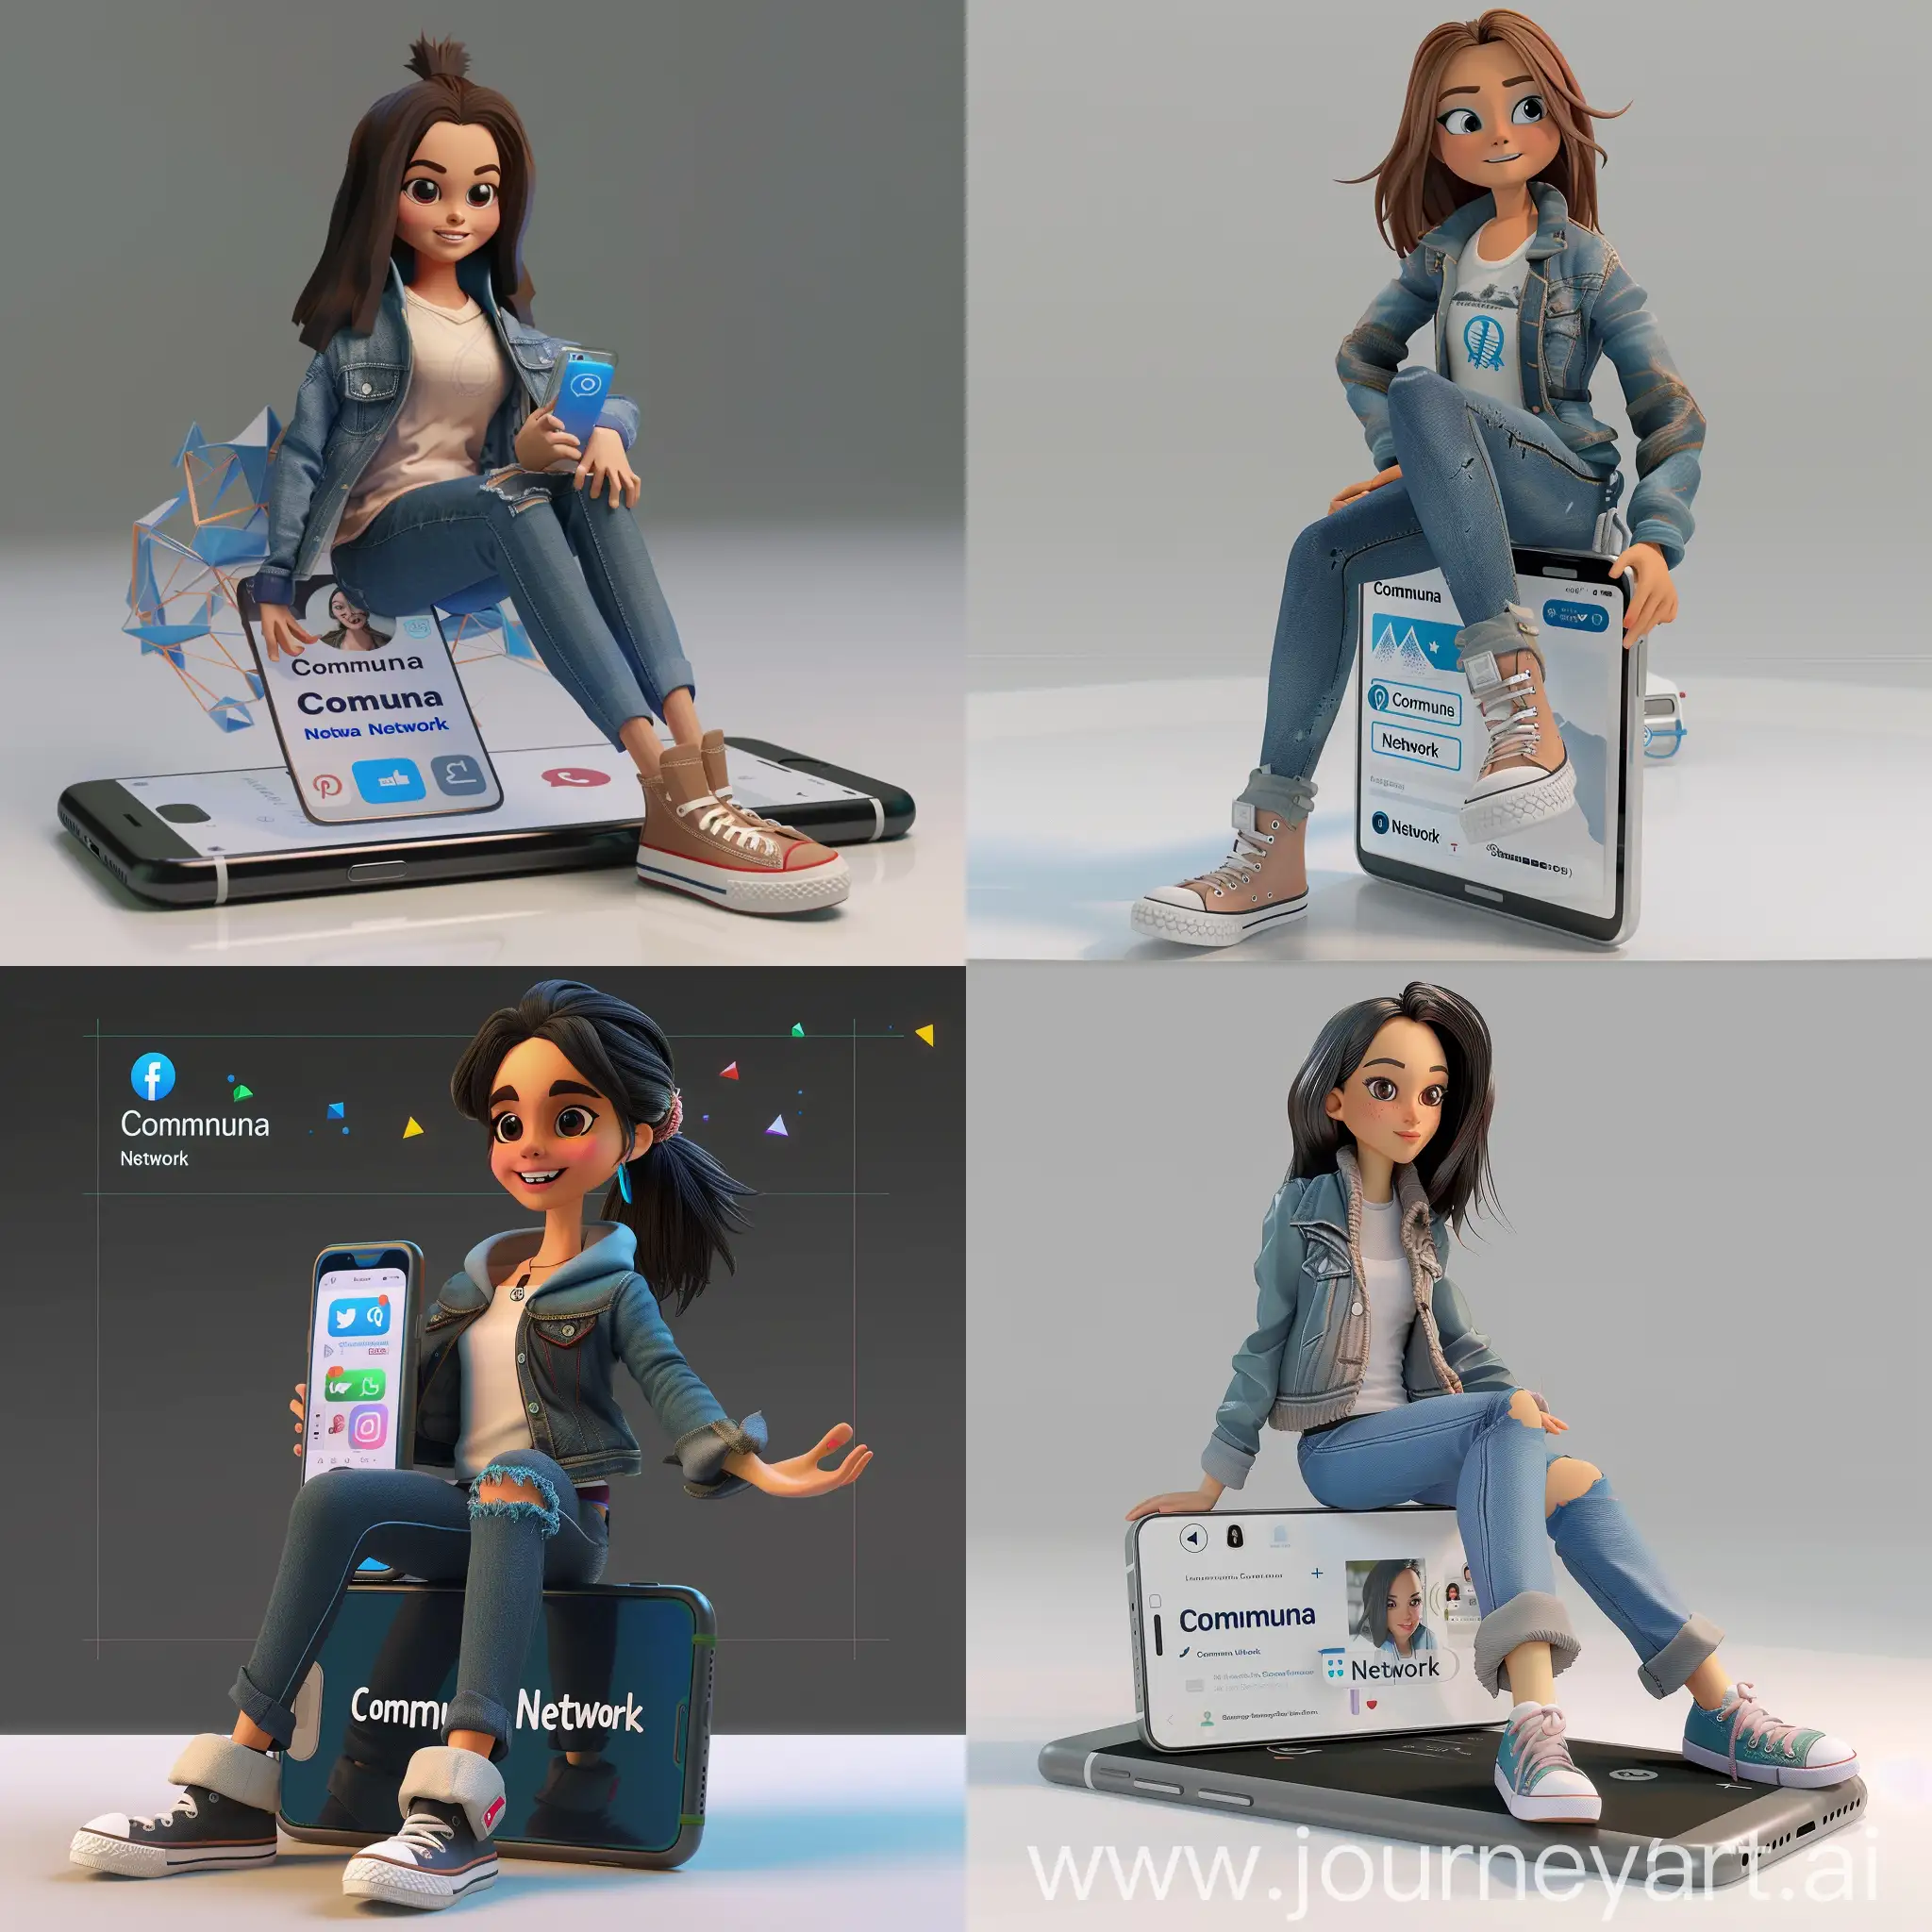 Create a 3D illustration of an animated characters sitting casually on top of an Iphone with Telegram opened int. The character should be a beautiful female woman wearing modern clothing such as jeans jacket and convese shoes. The Background of the image is a social media profile page with a user name “Communa Network” and a profile picture that matches the animated character.